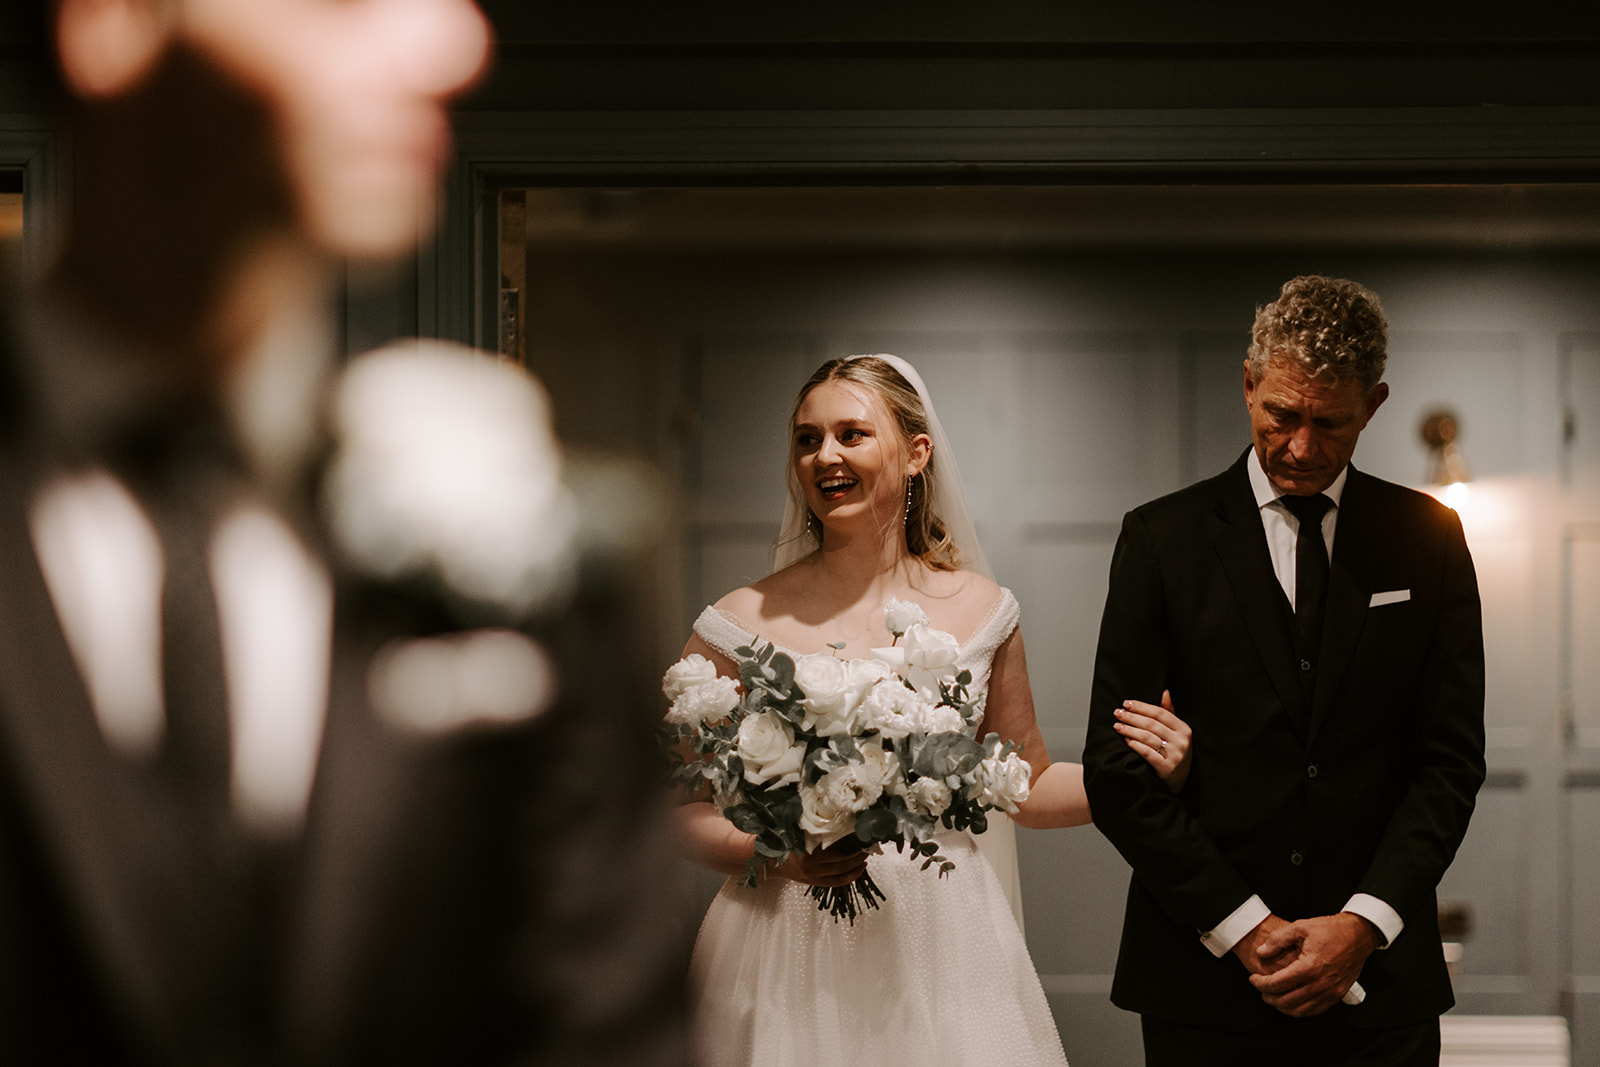 walking down the aisle at Kingstreet Townhouse wedding, Manchester